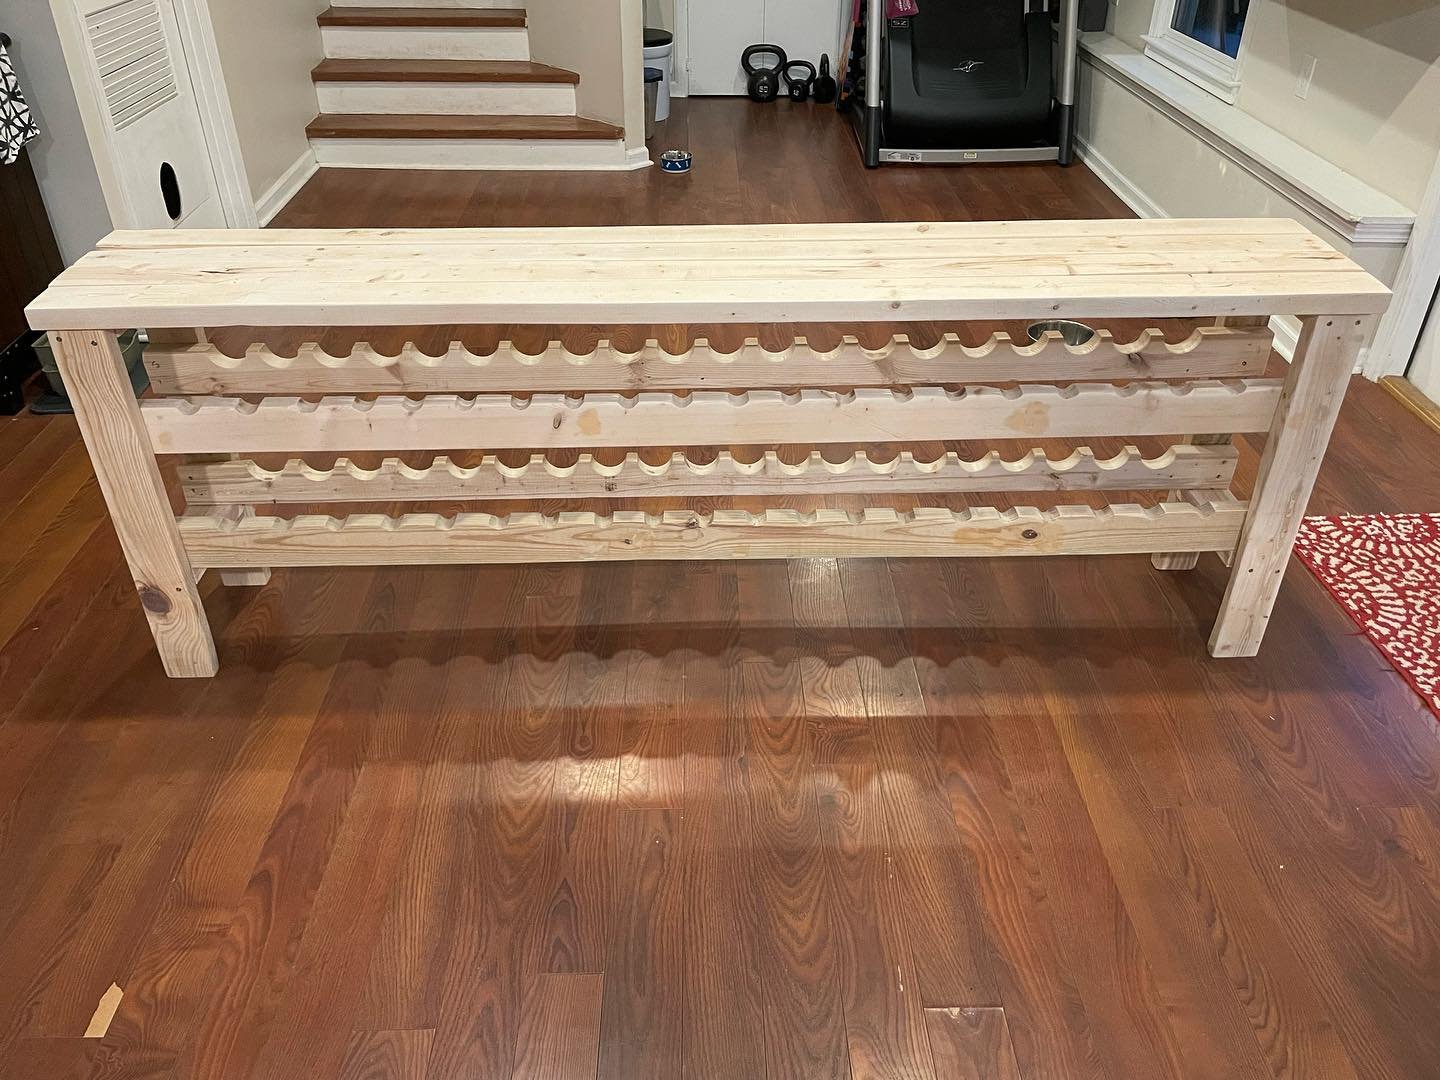 Custom 7&rsquo; #wine tasting table with rack I built for an FB marketplace client🍷She sent me her idea, I sent her a design. I slapped it together with reclaimed 2x4&rsquo;s. Voil&agrave;! #carpentry #homemadefurniture